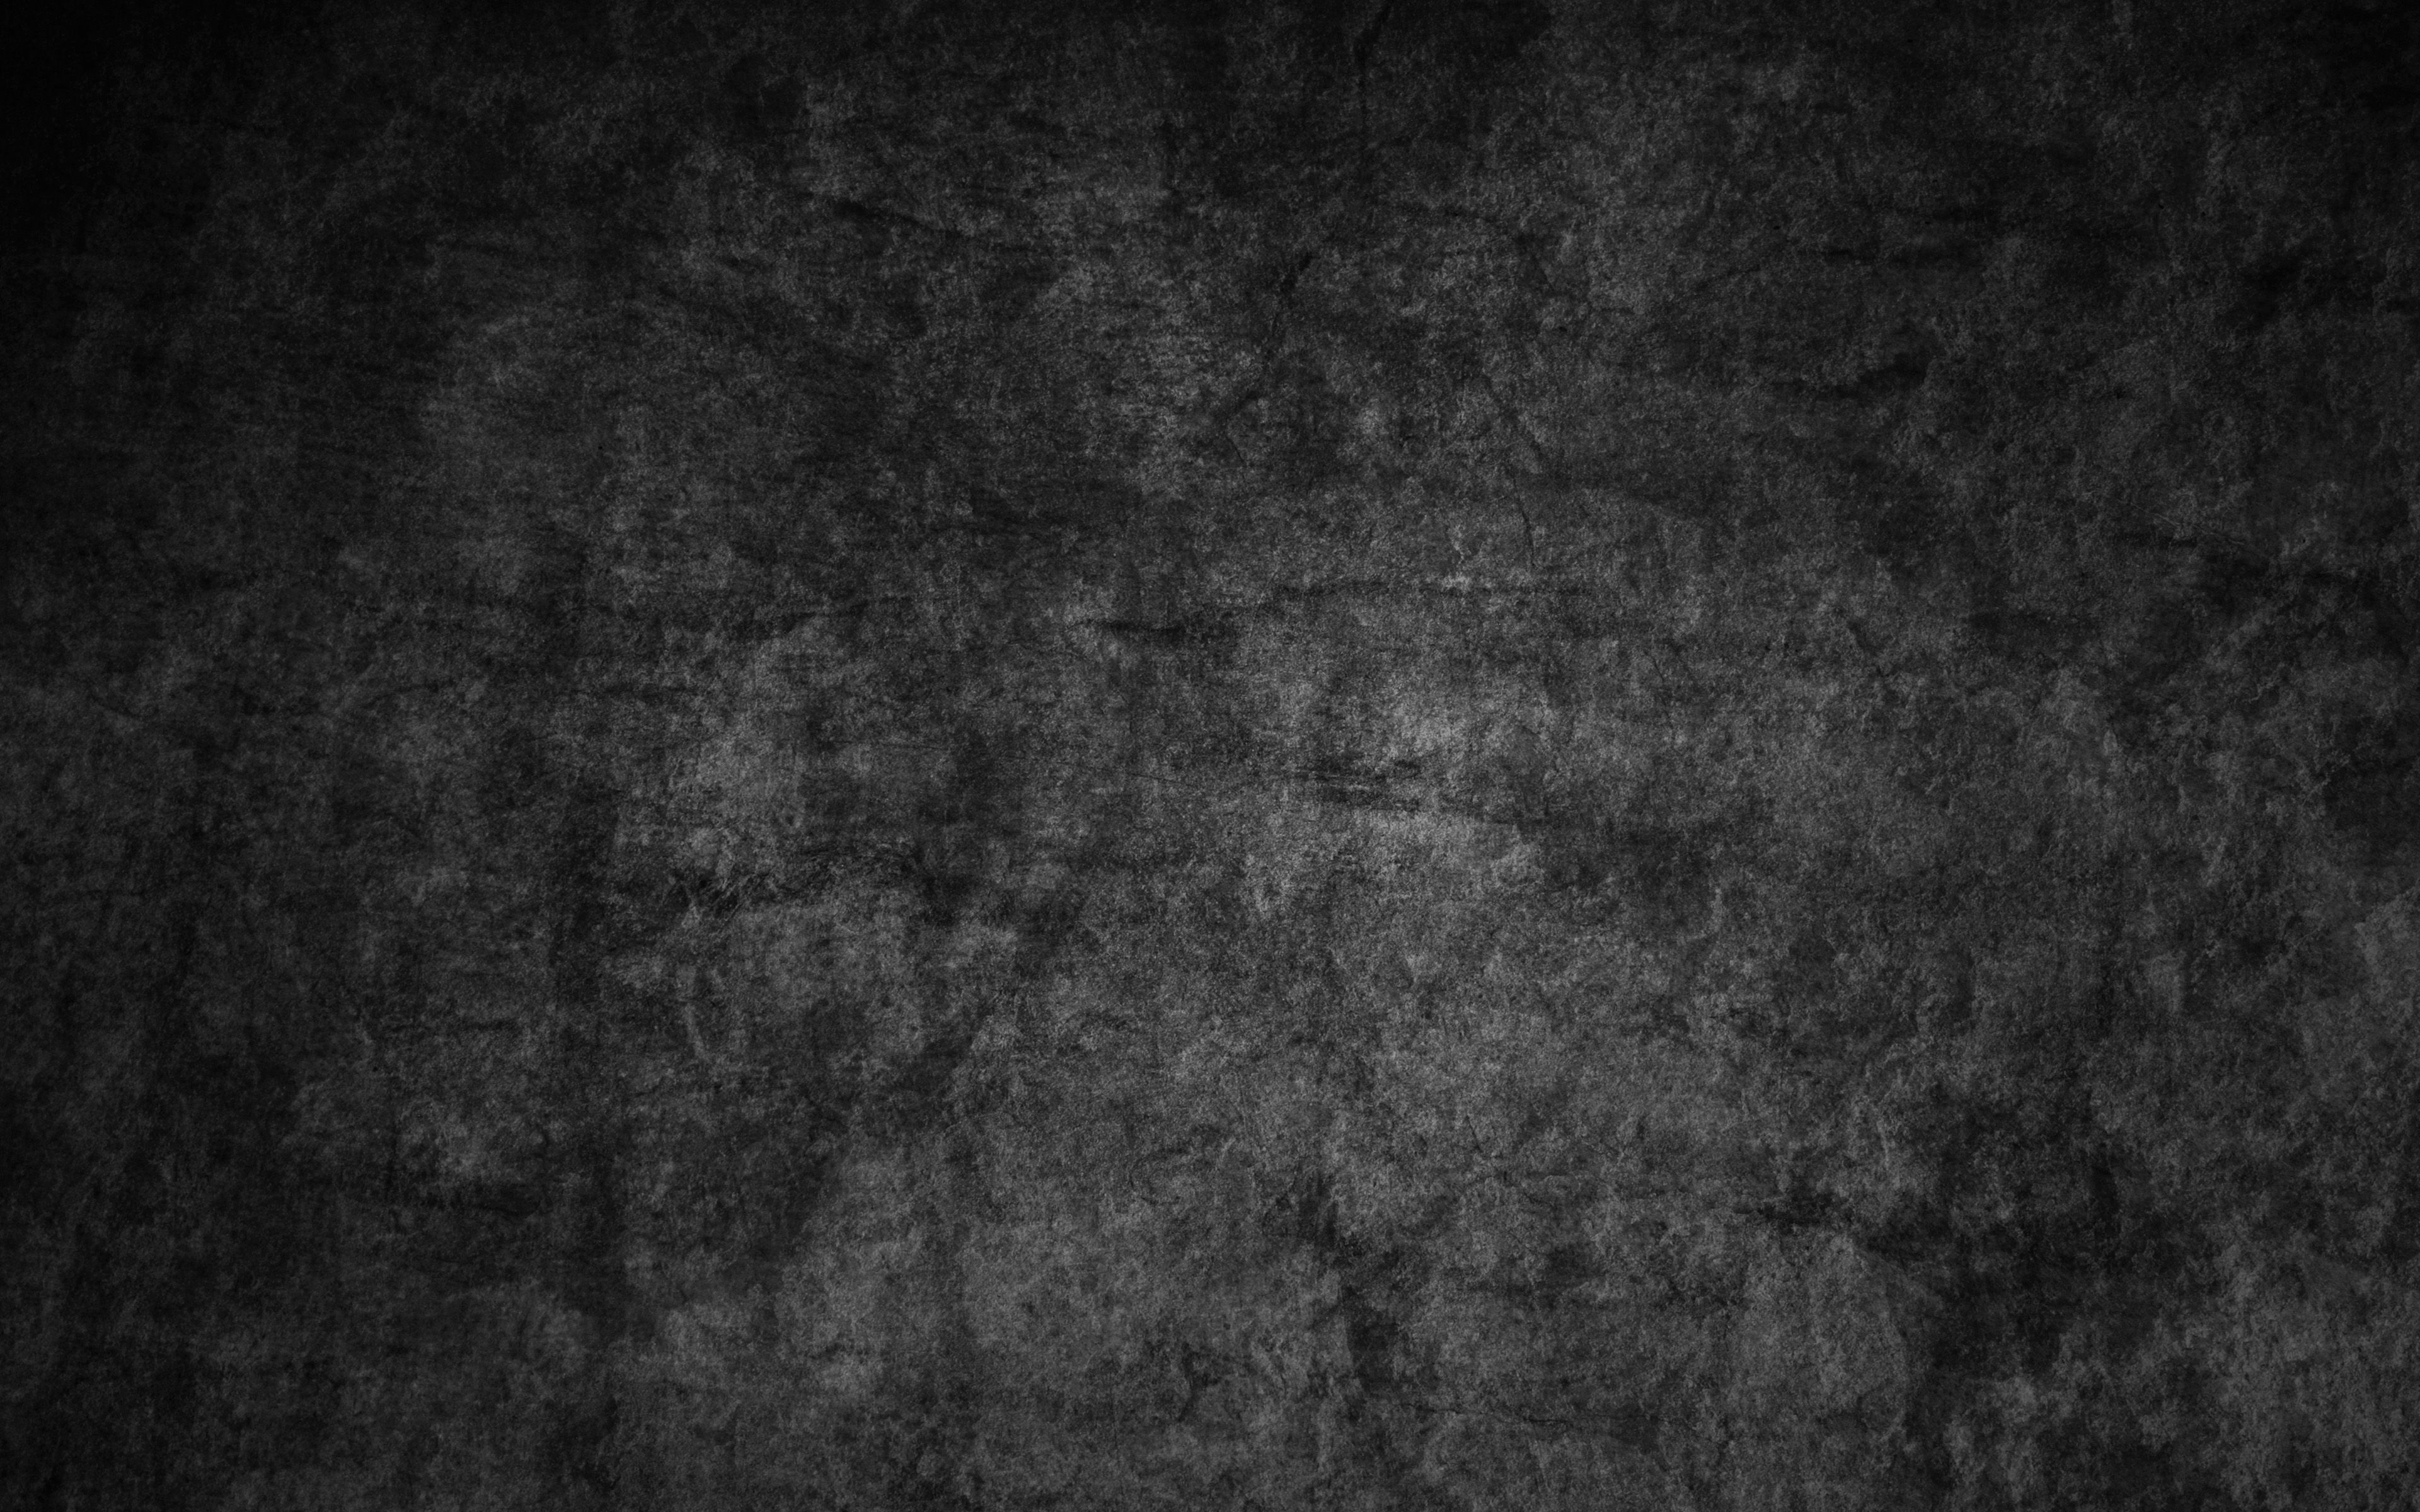 Download wallpaper black stone background, 4k, stone textures, grunge background, stone wall, black background, black stone for desktop with resolution 3840x2400. High Quality HD picture wallpaper